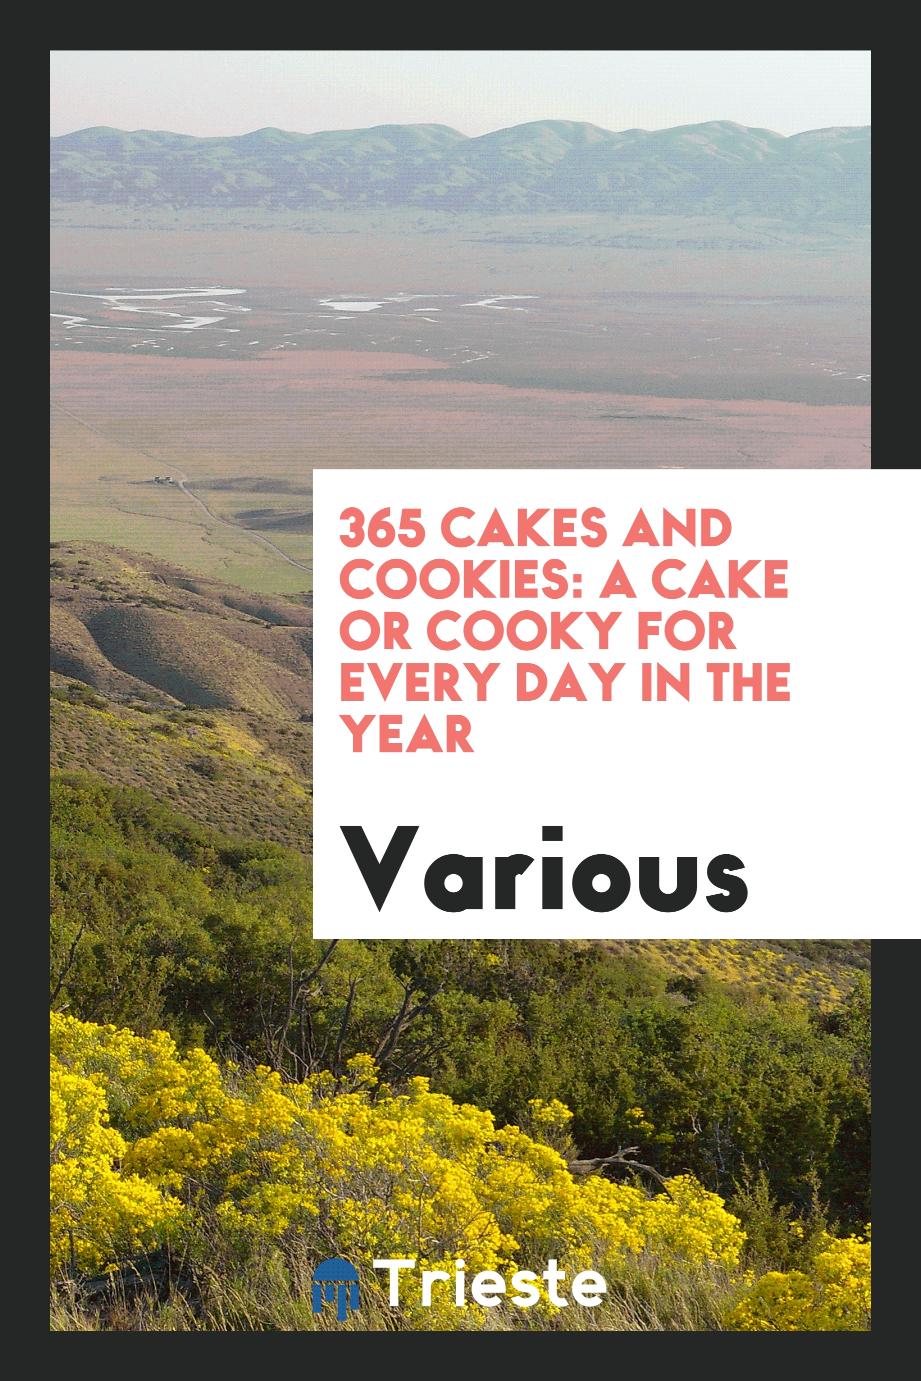 365 Cakes and Cookies: A Cake Or Cooky for Every Day in the Year